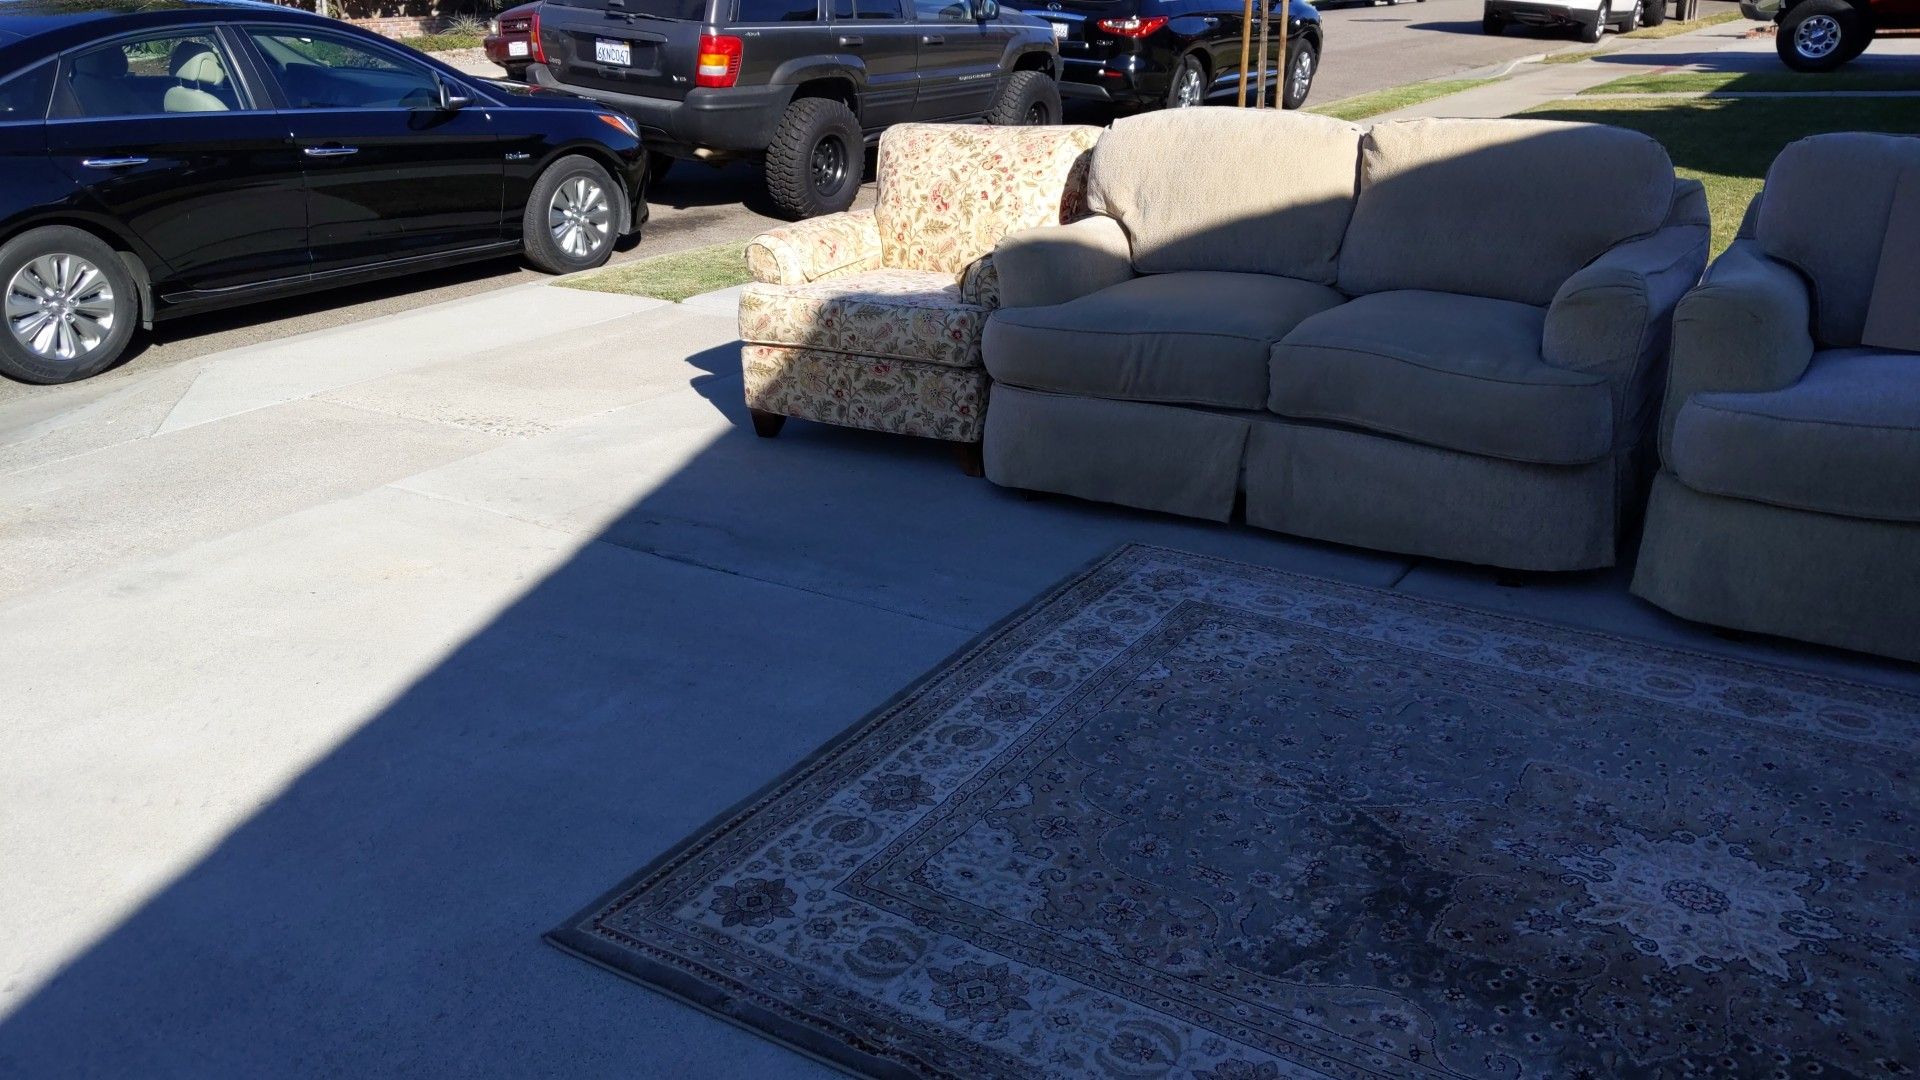 Free furniture, coach loveseat, chair and rug. Pickup today only . Is in fair condition. 7104 El Veloz Way in Buena Park